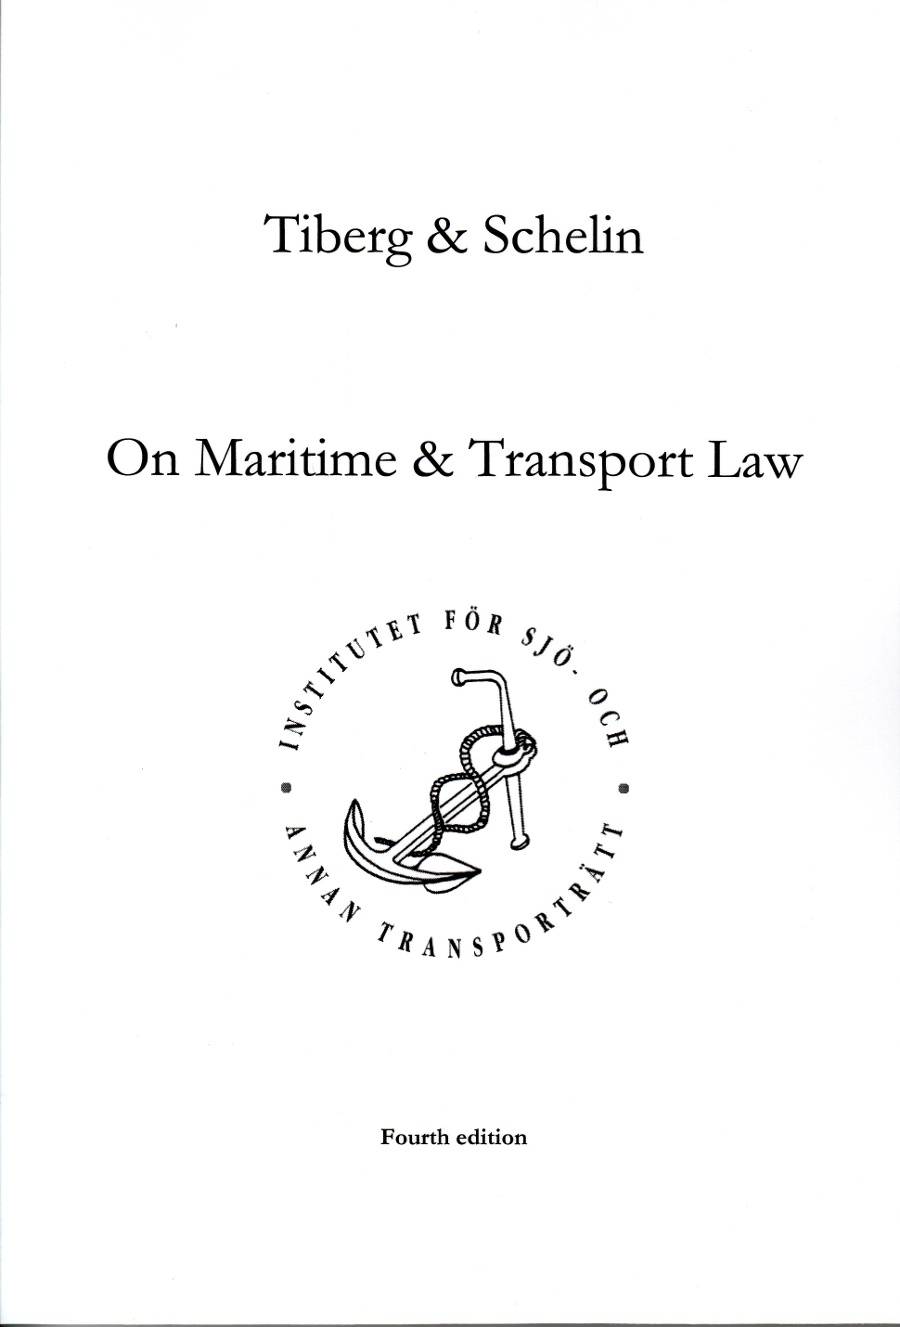 On maritime & transport law